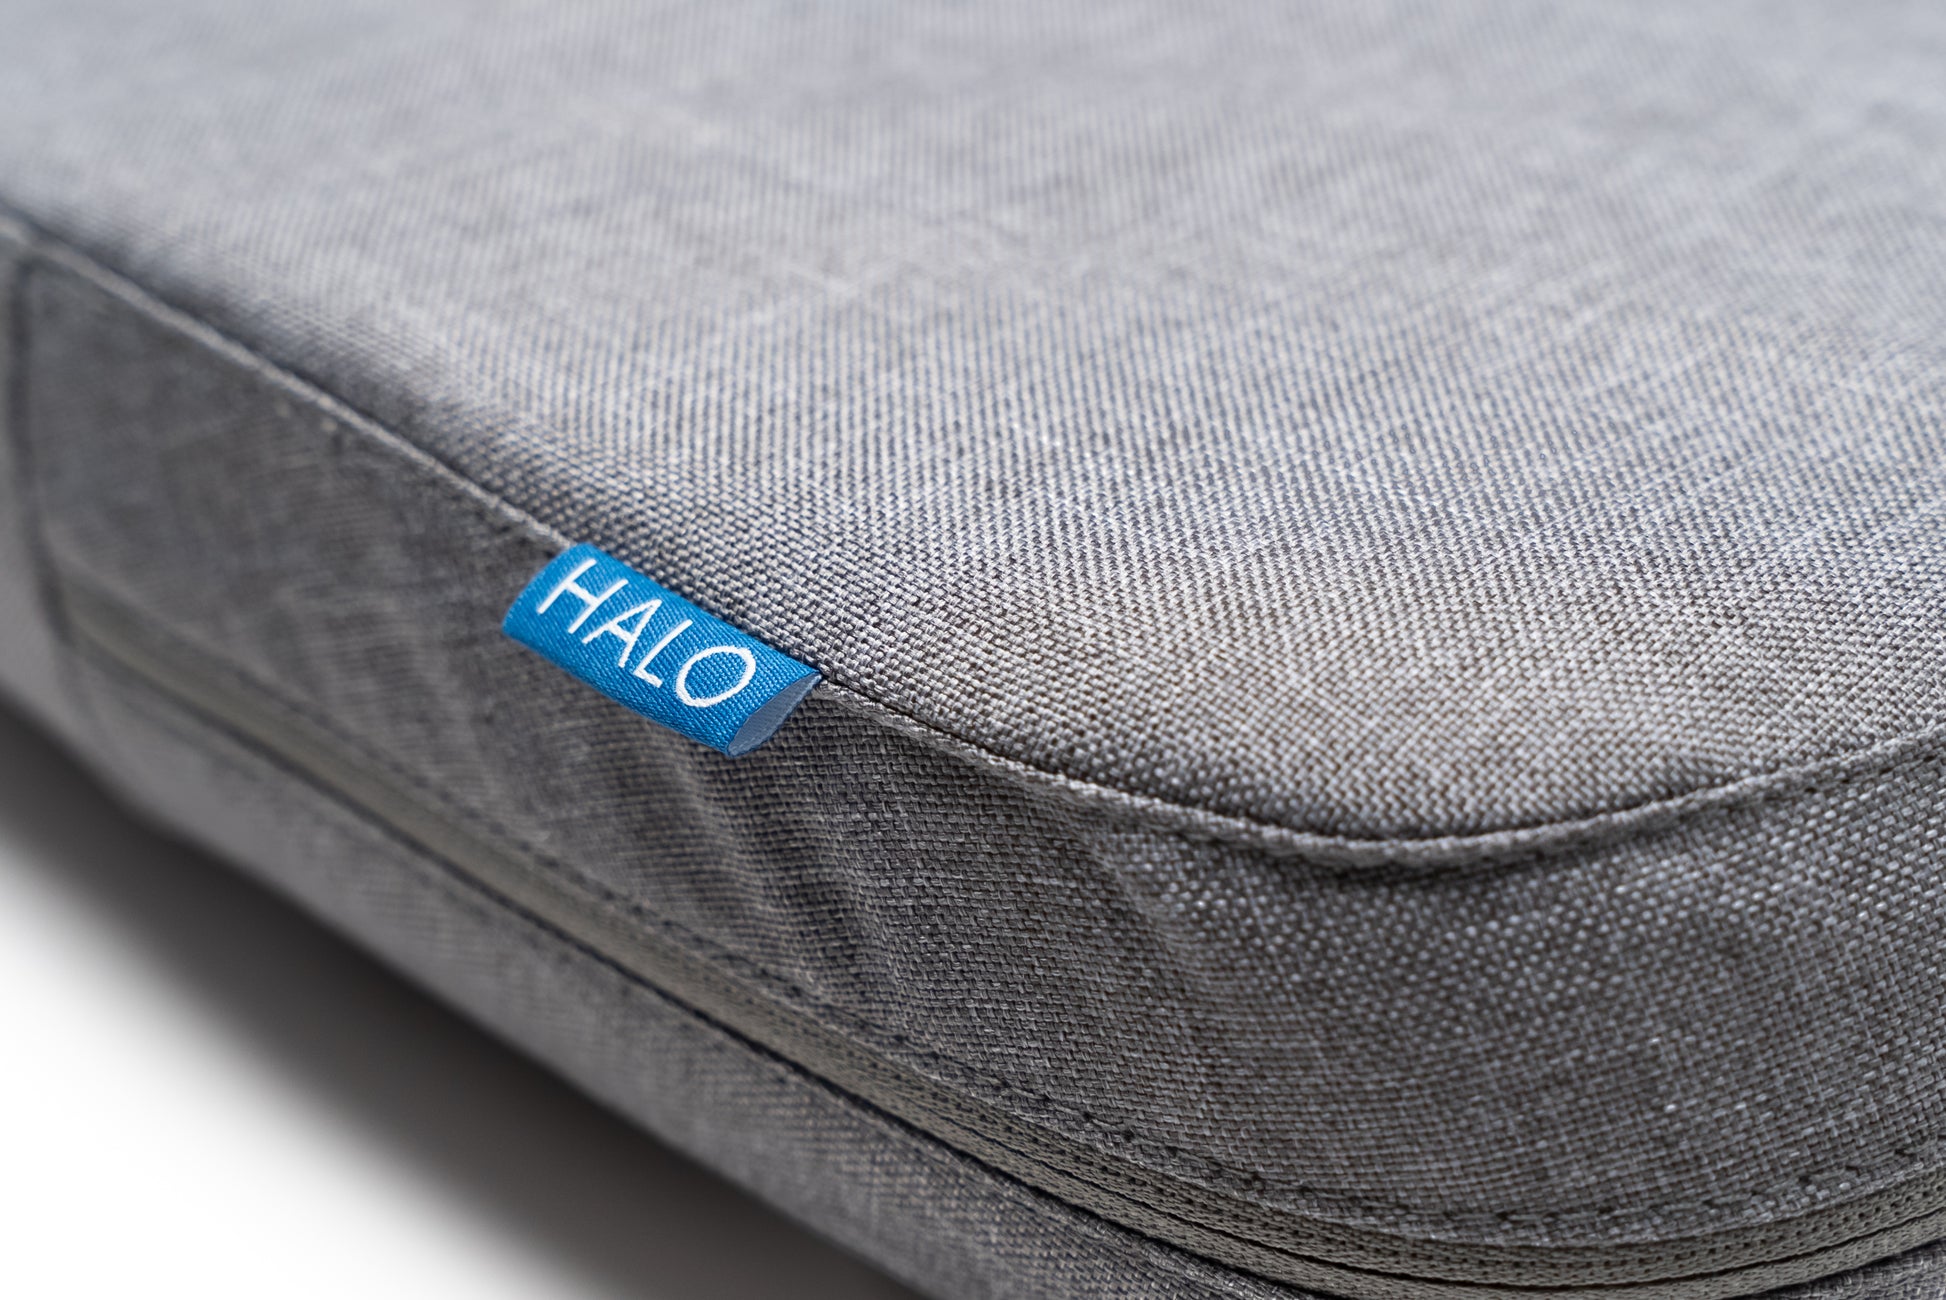 Close up image of the HALO Back Stretch Massage Cushion to show the HALO logo and materials and fabric quality.